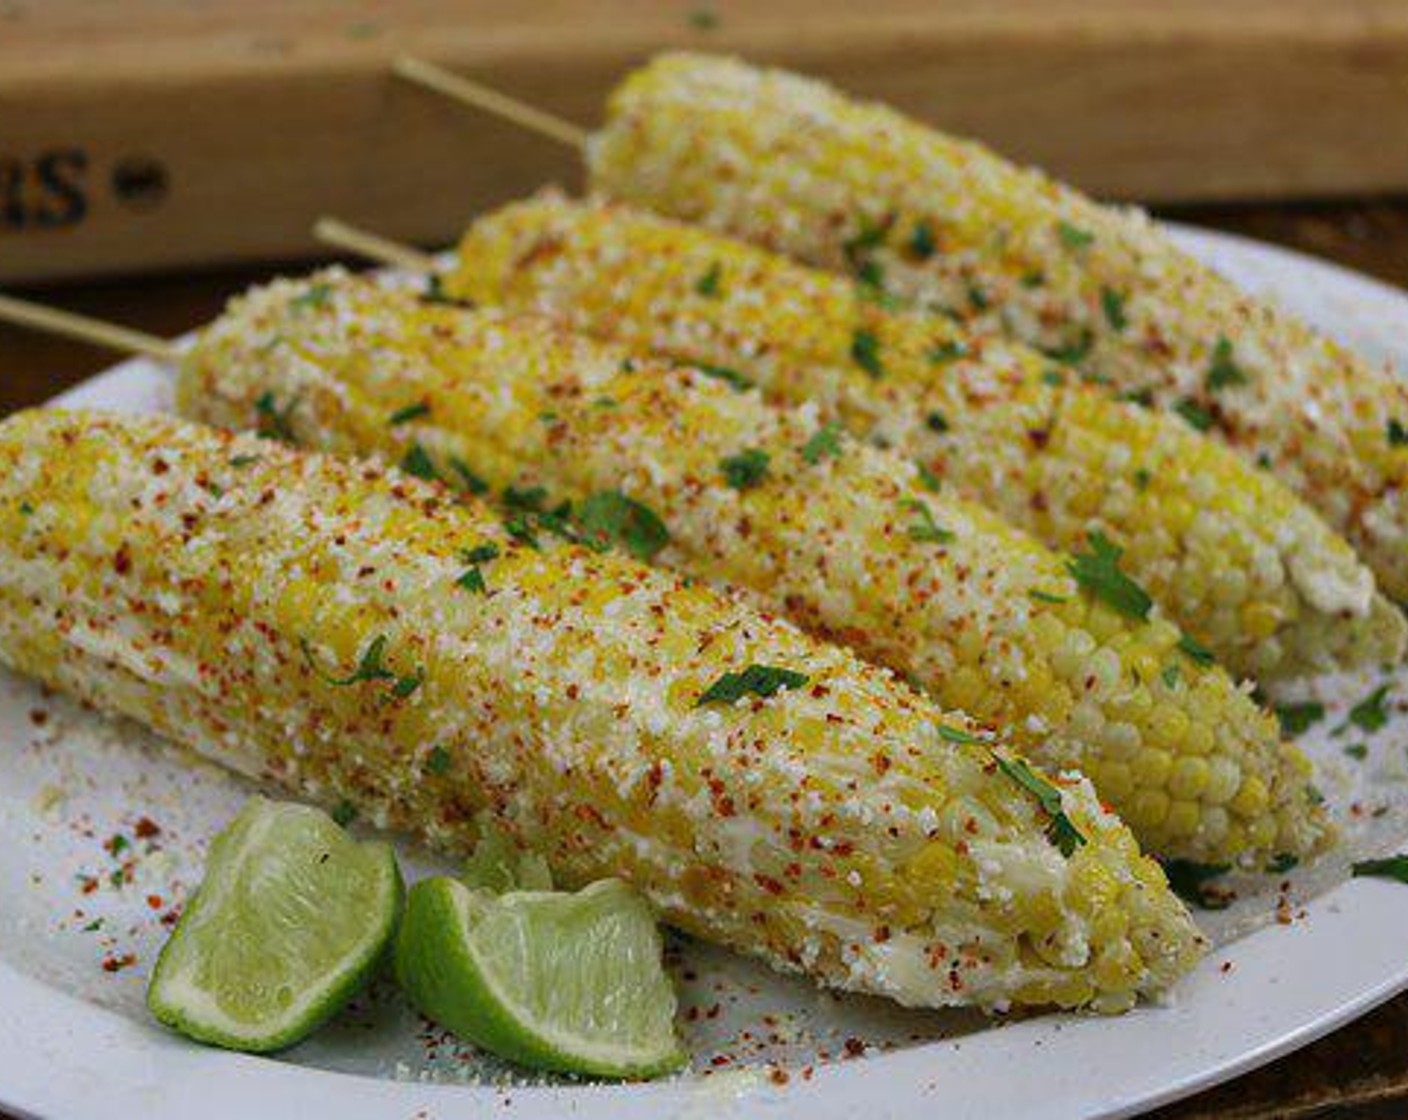 step 3 For this grilled corn on the cob recipe, I decided to do my take on a Mexican style street corn. Once I remove the grilled corn on the cob from the grill and remove the shuck and silks, I apply a layer of Mayonnaise (to taste) and Cotija Cheese (to taste). Then sprinkle some Tajin (to taste), a squirt of Limes (to taste) and Fresh Cilantro (to taste). And that is how you make grilled Mexican street corn, serve and enjoy.